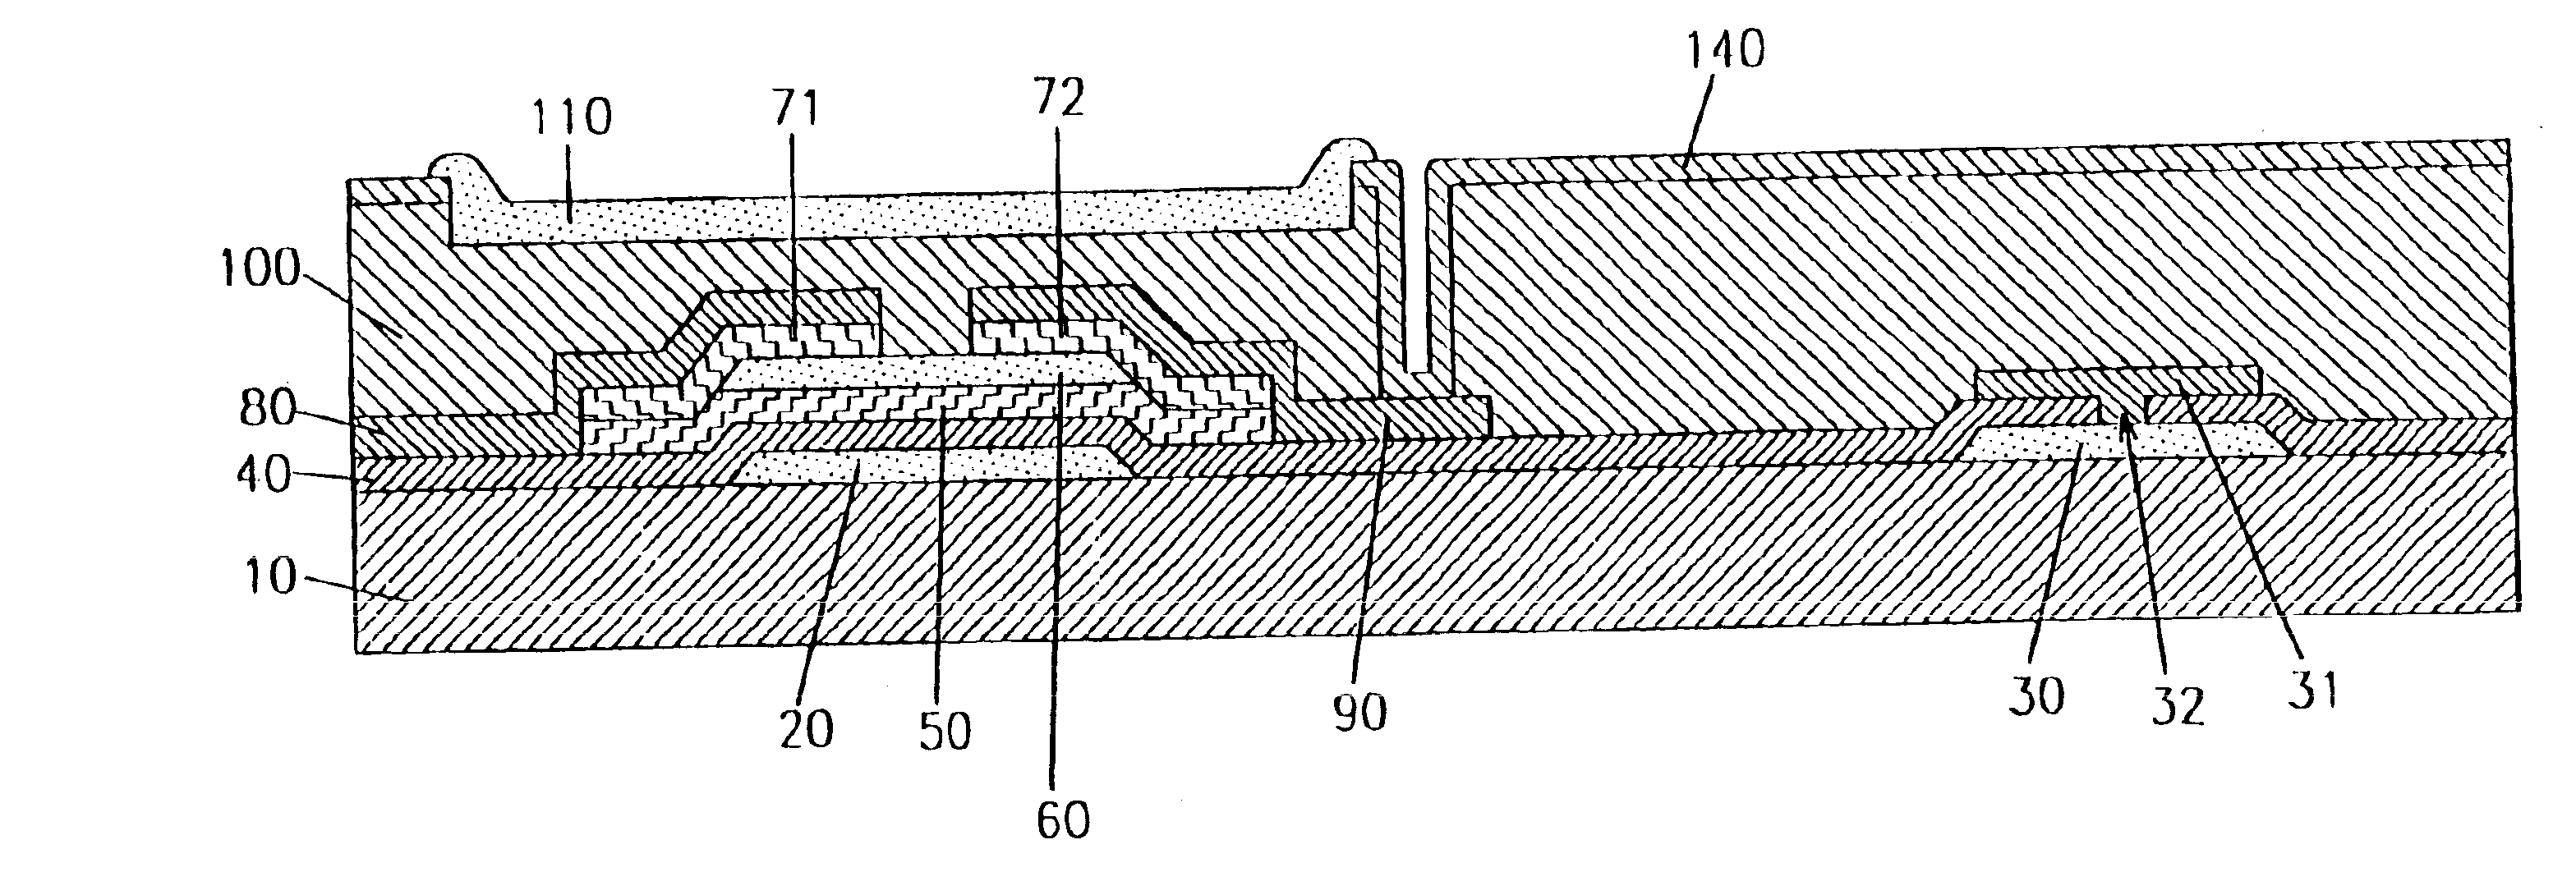 Liquid crystal displays including organic passivation layer contacting a portion of the semiconductor layer between source and drain regions